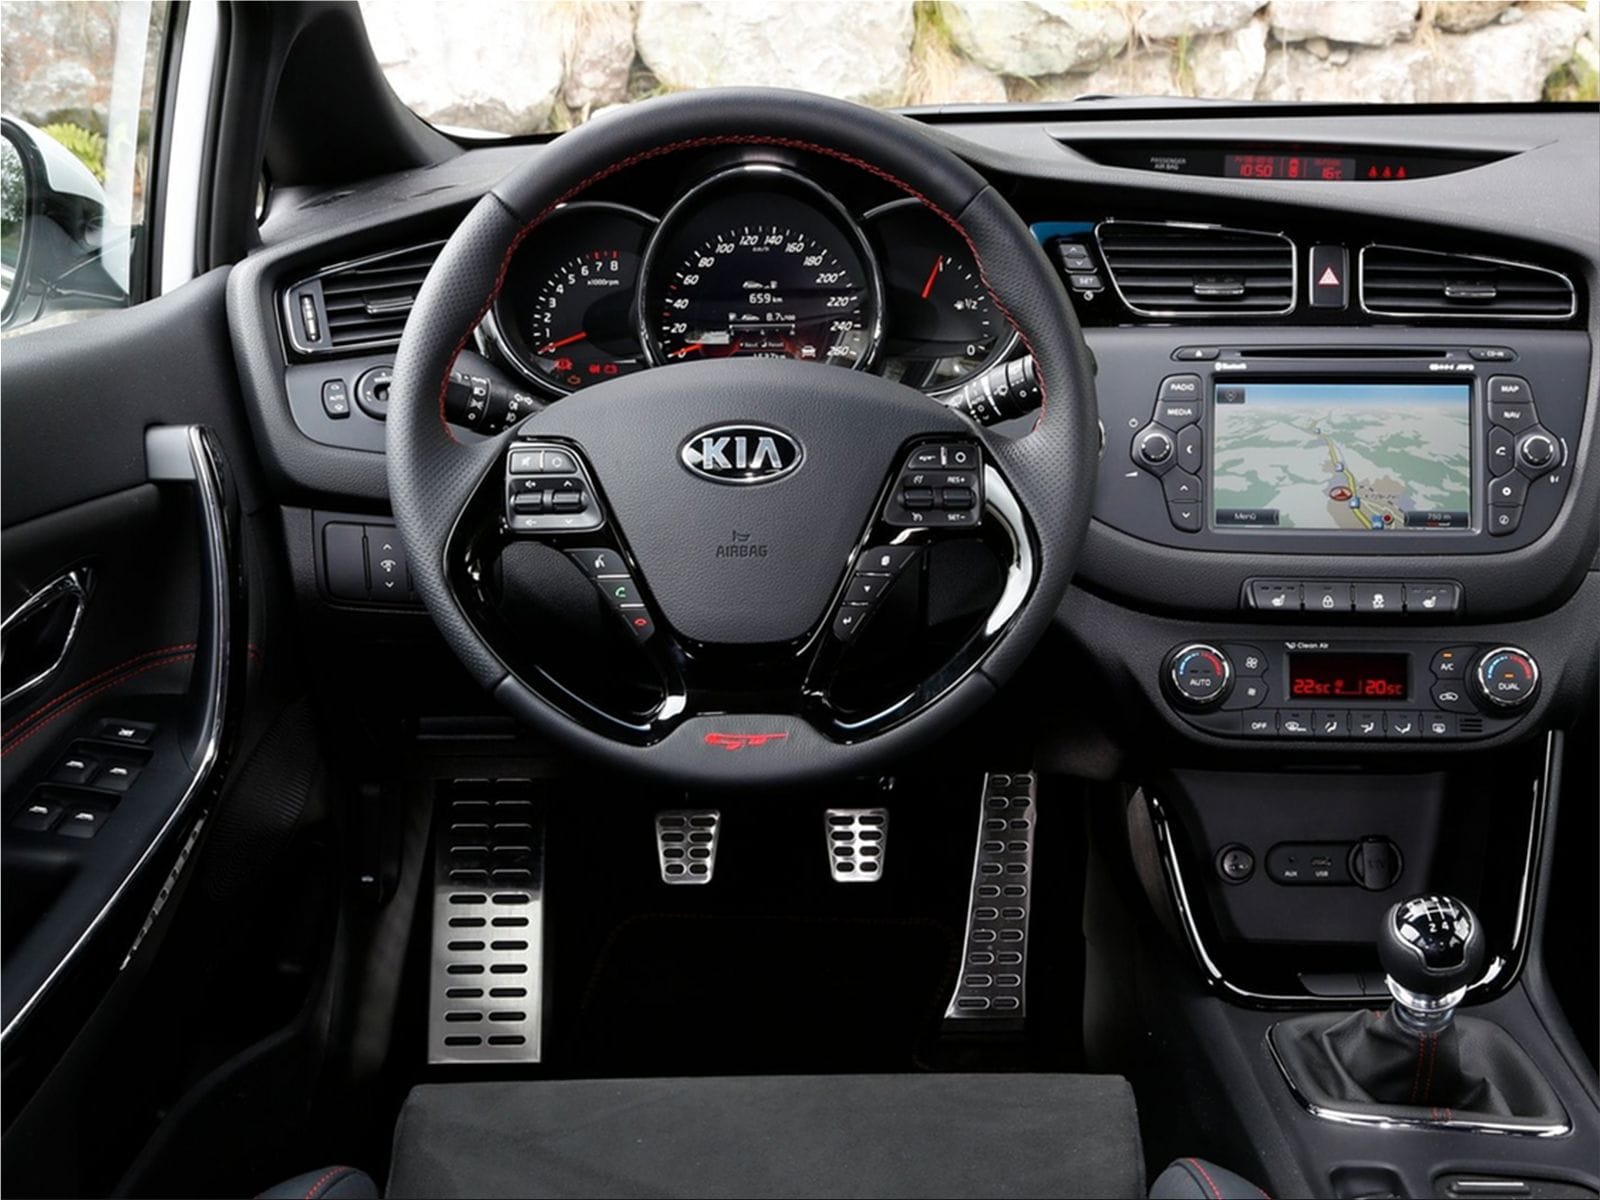 Kia Pro Ceed Gt And Kia Ceed Gt Style Performance And